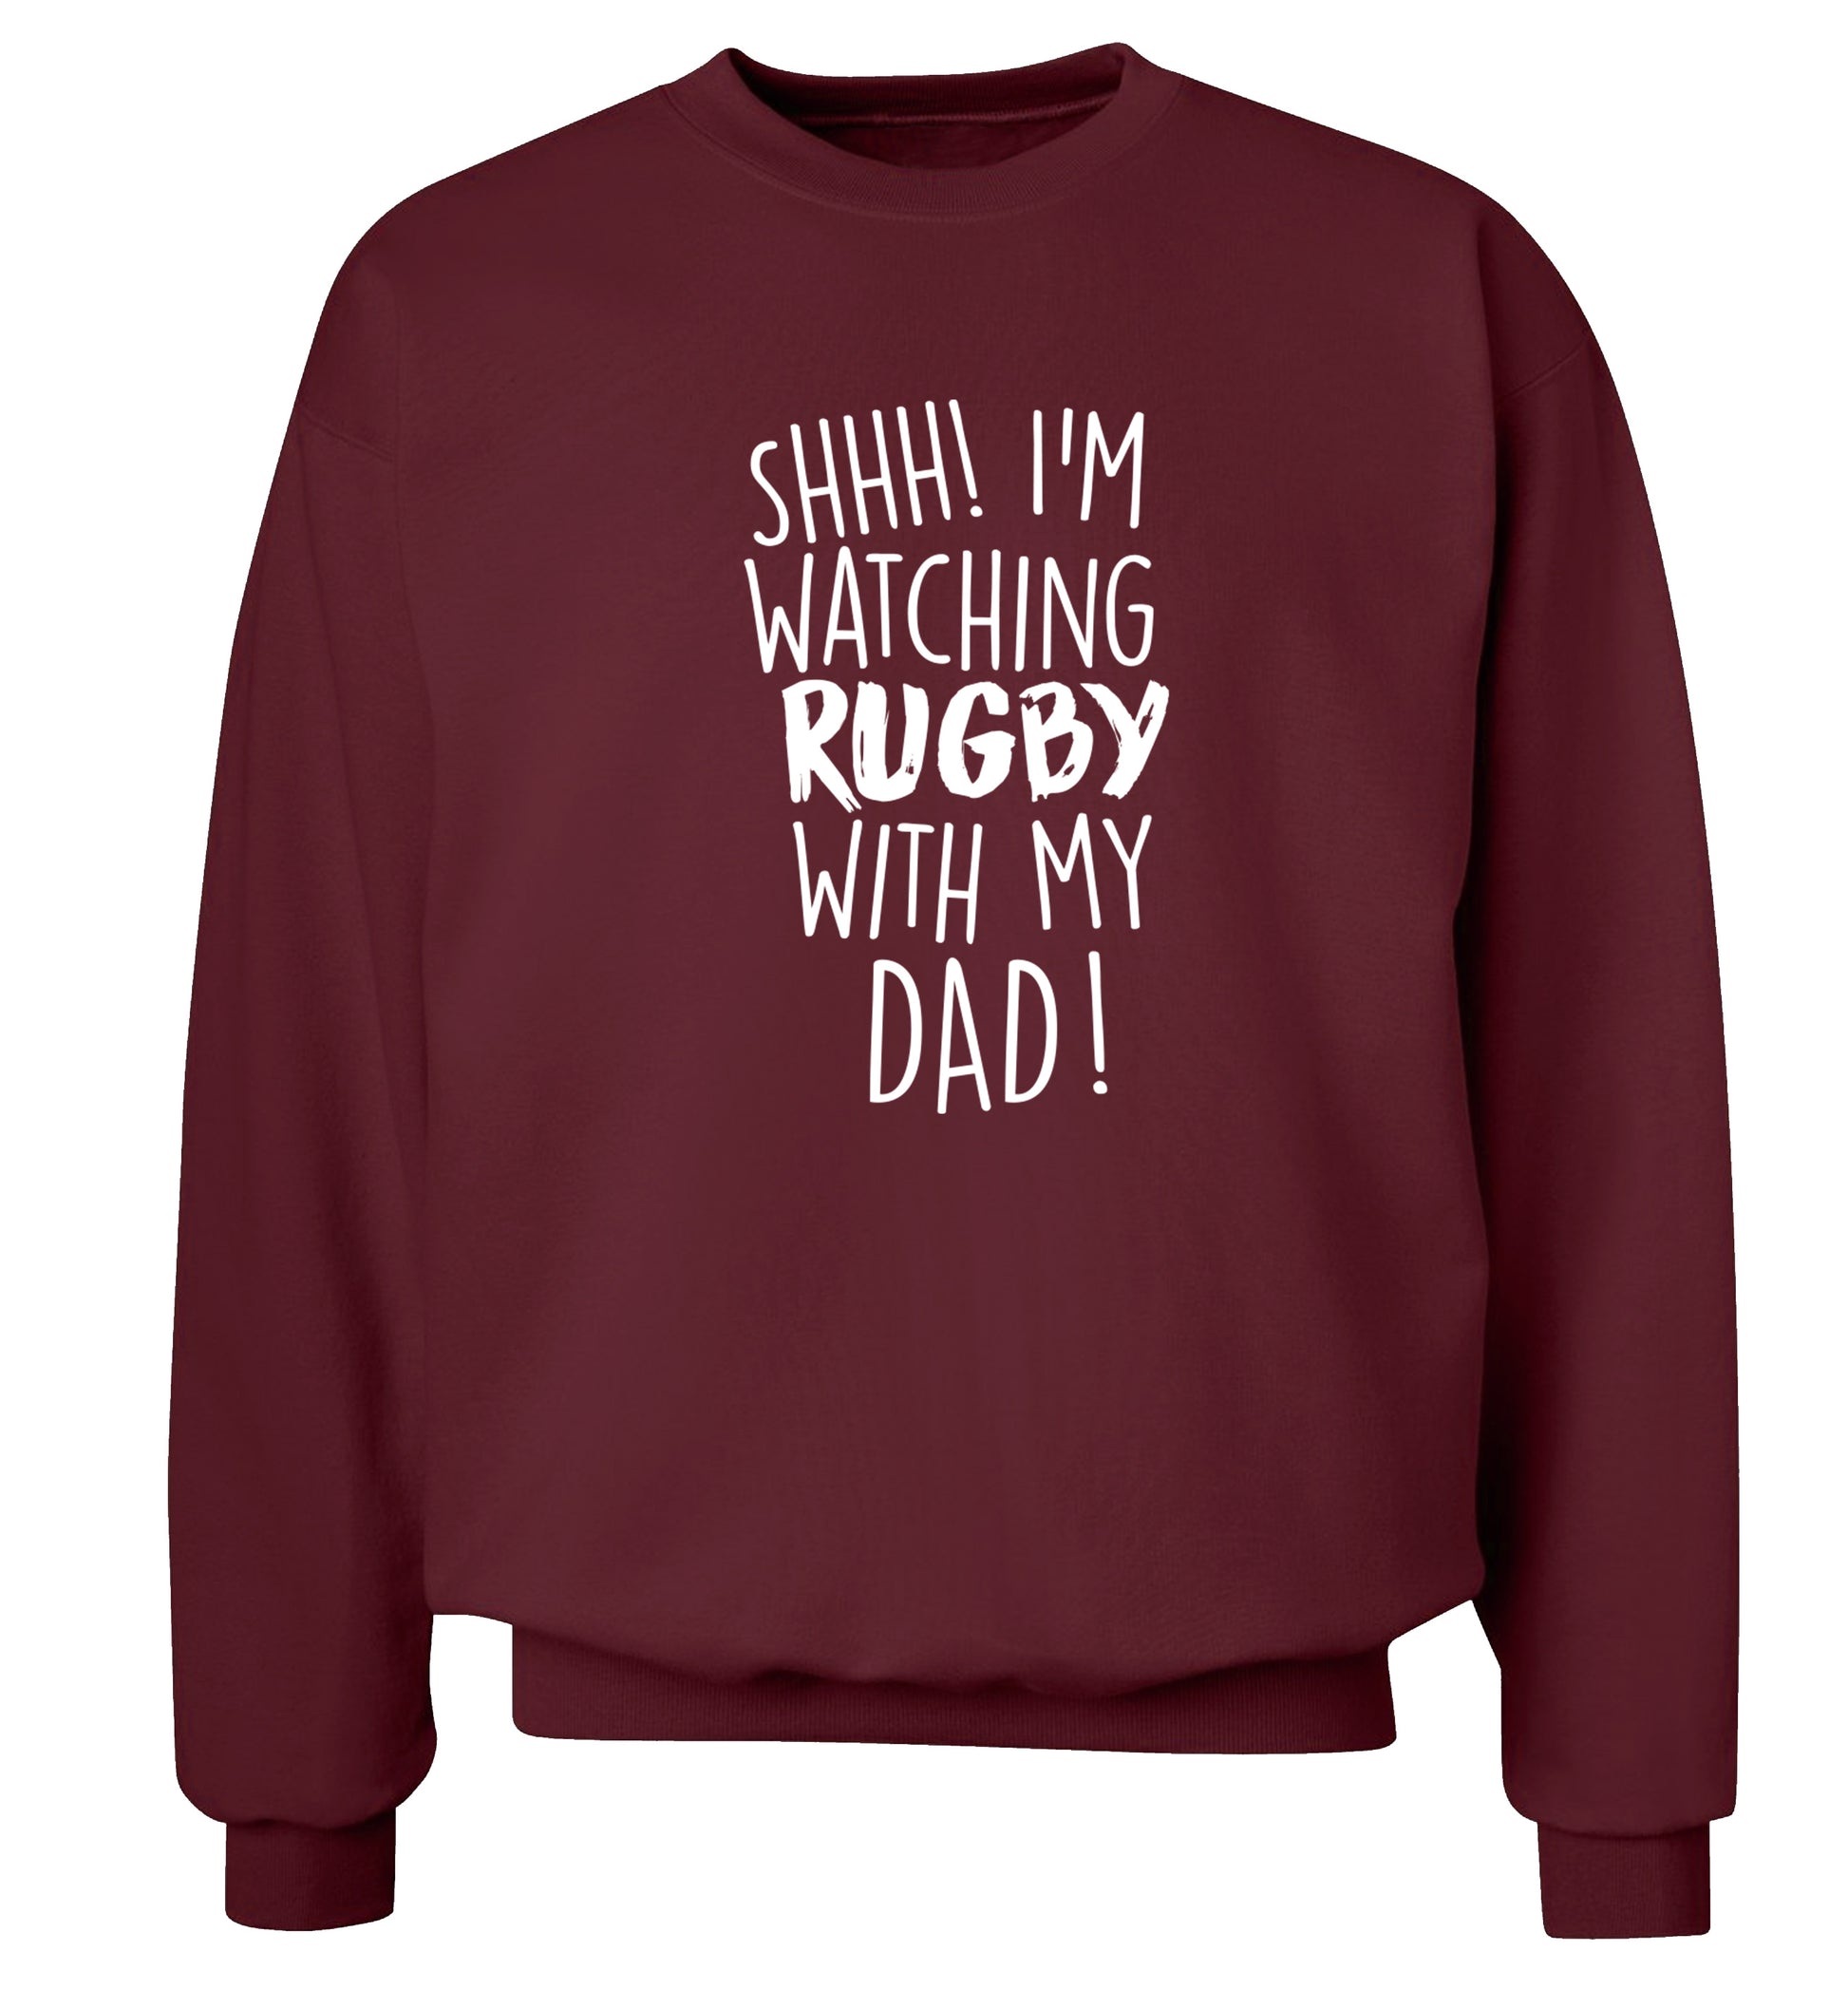 Shh... I'm watching rugby with my dad Adult's unisex maroon Sweater 2XL